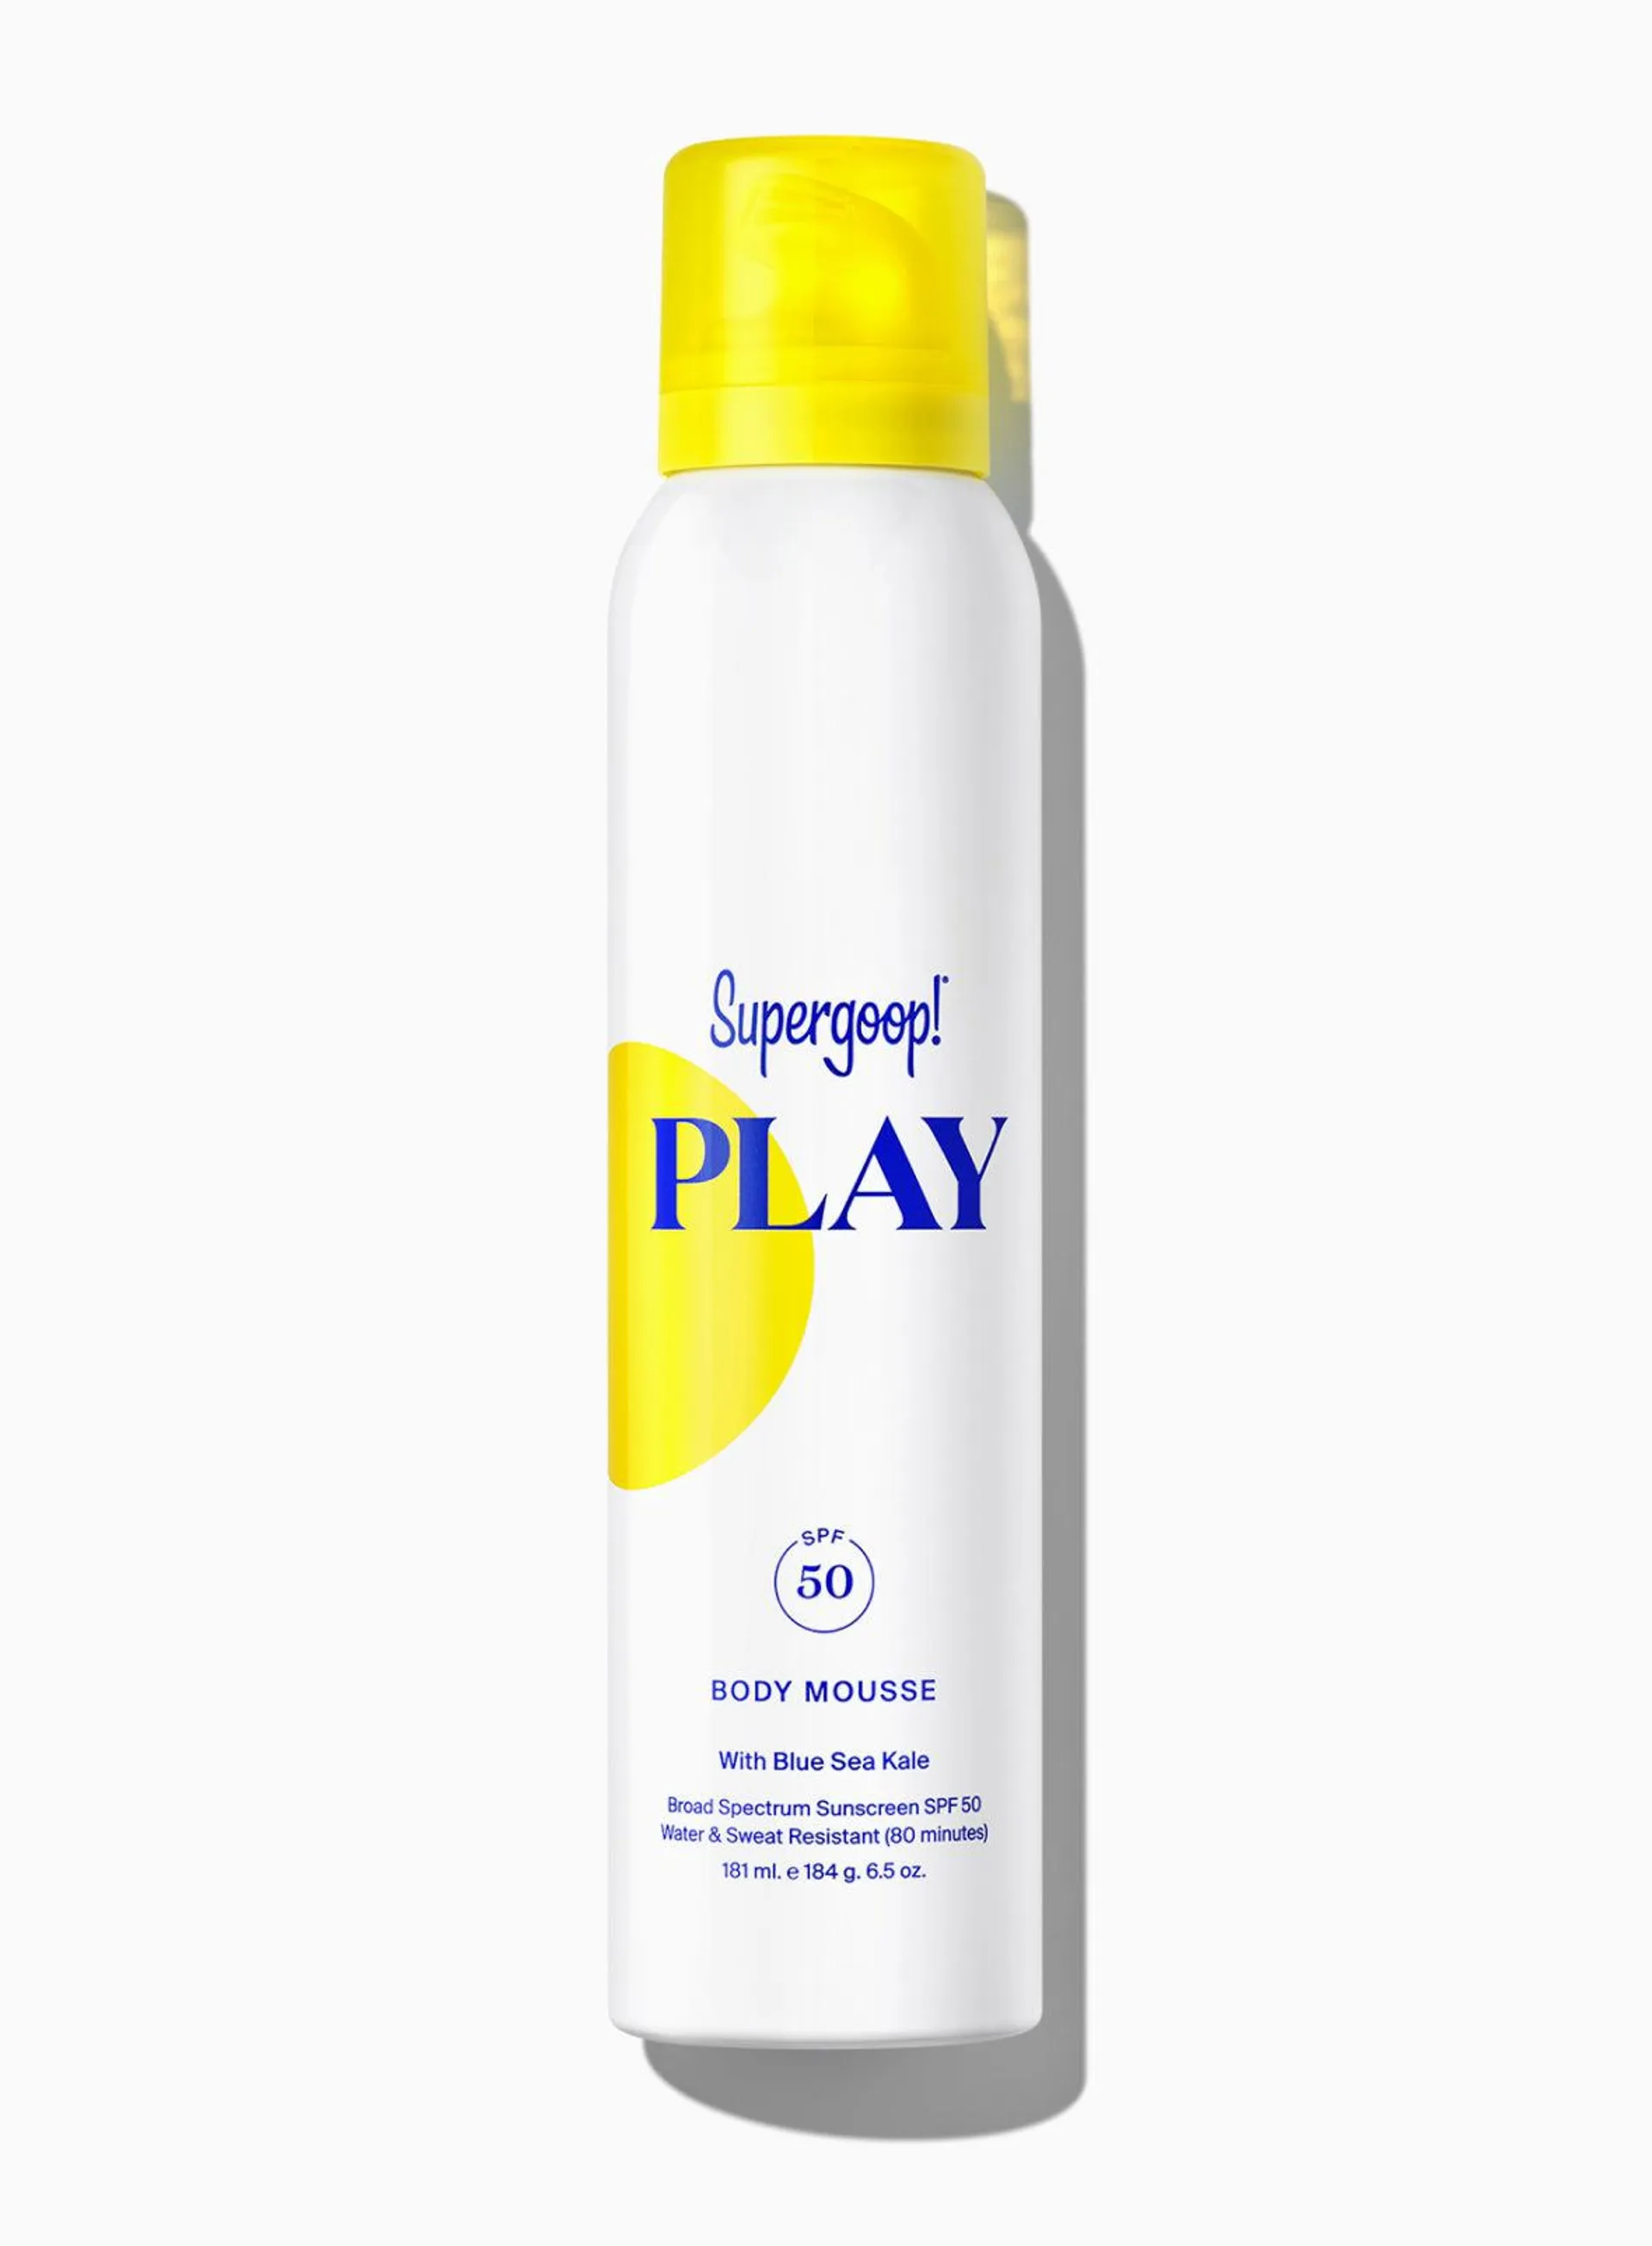 PLAY Body Mousse SPF 50